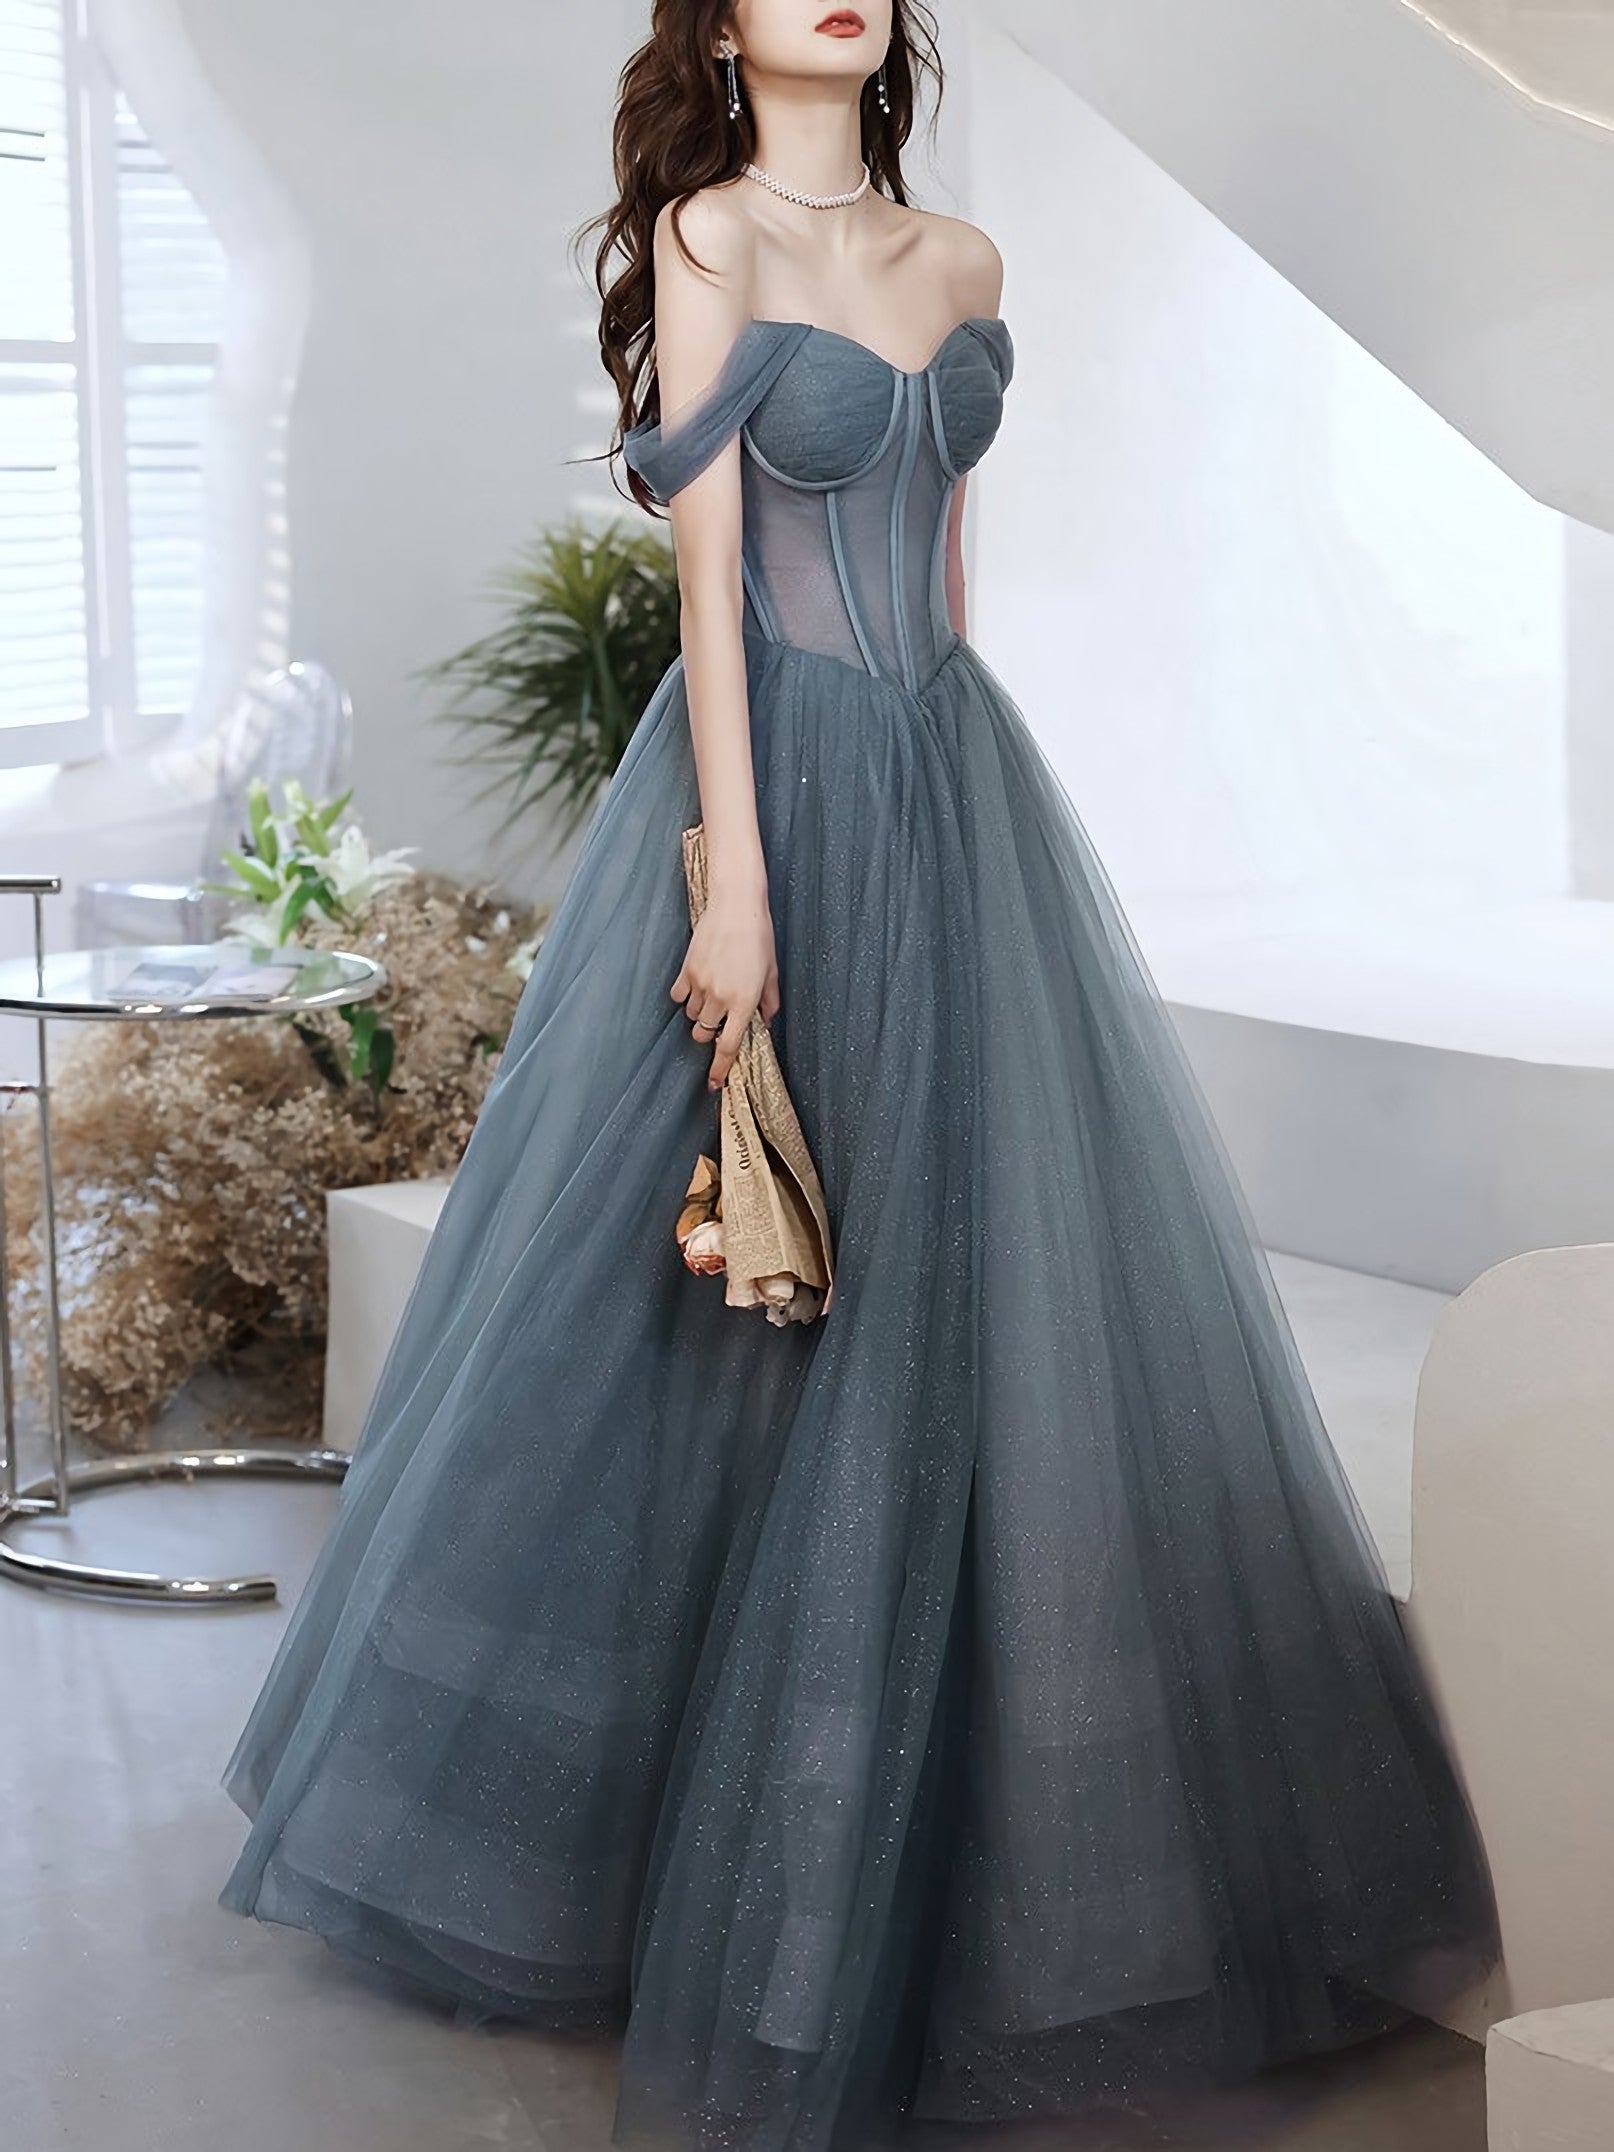 A Line Sweetheart Neck Gray Blue Tulle Long Corset Prom Dress, Blue Evening Dress outfit, Homecoming Dresses Vintage